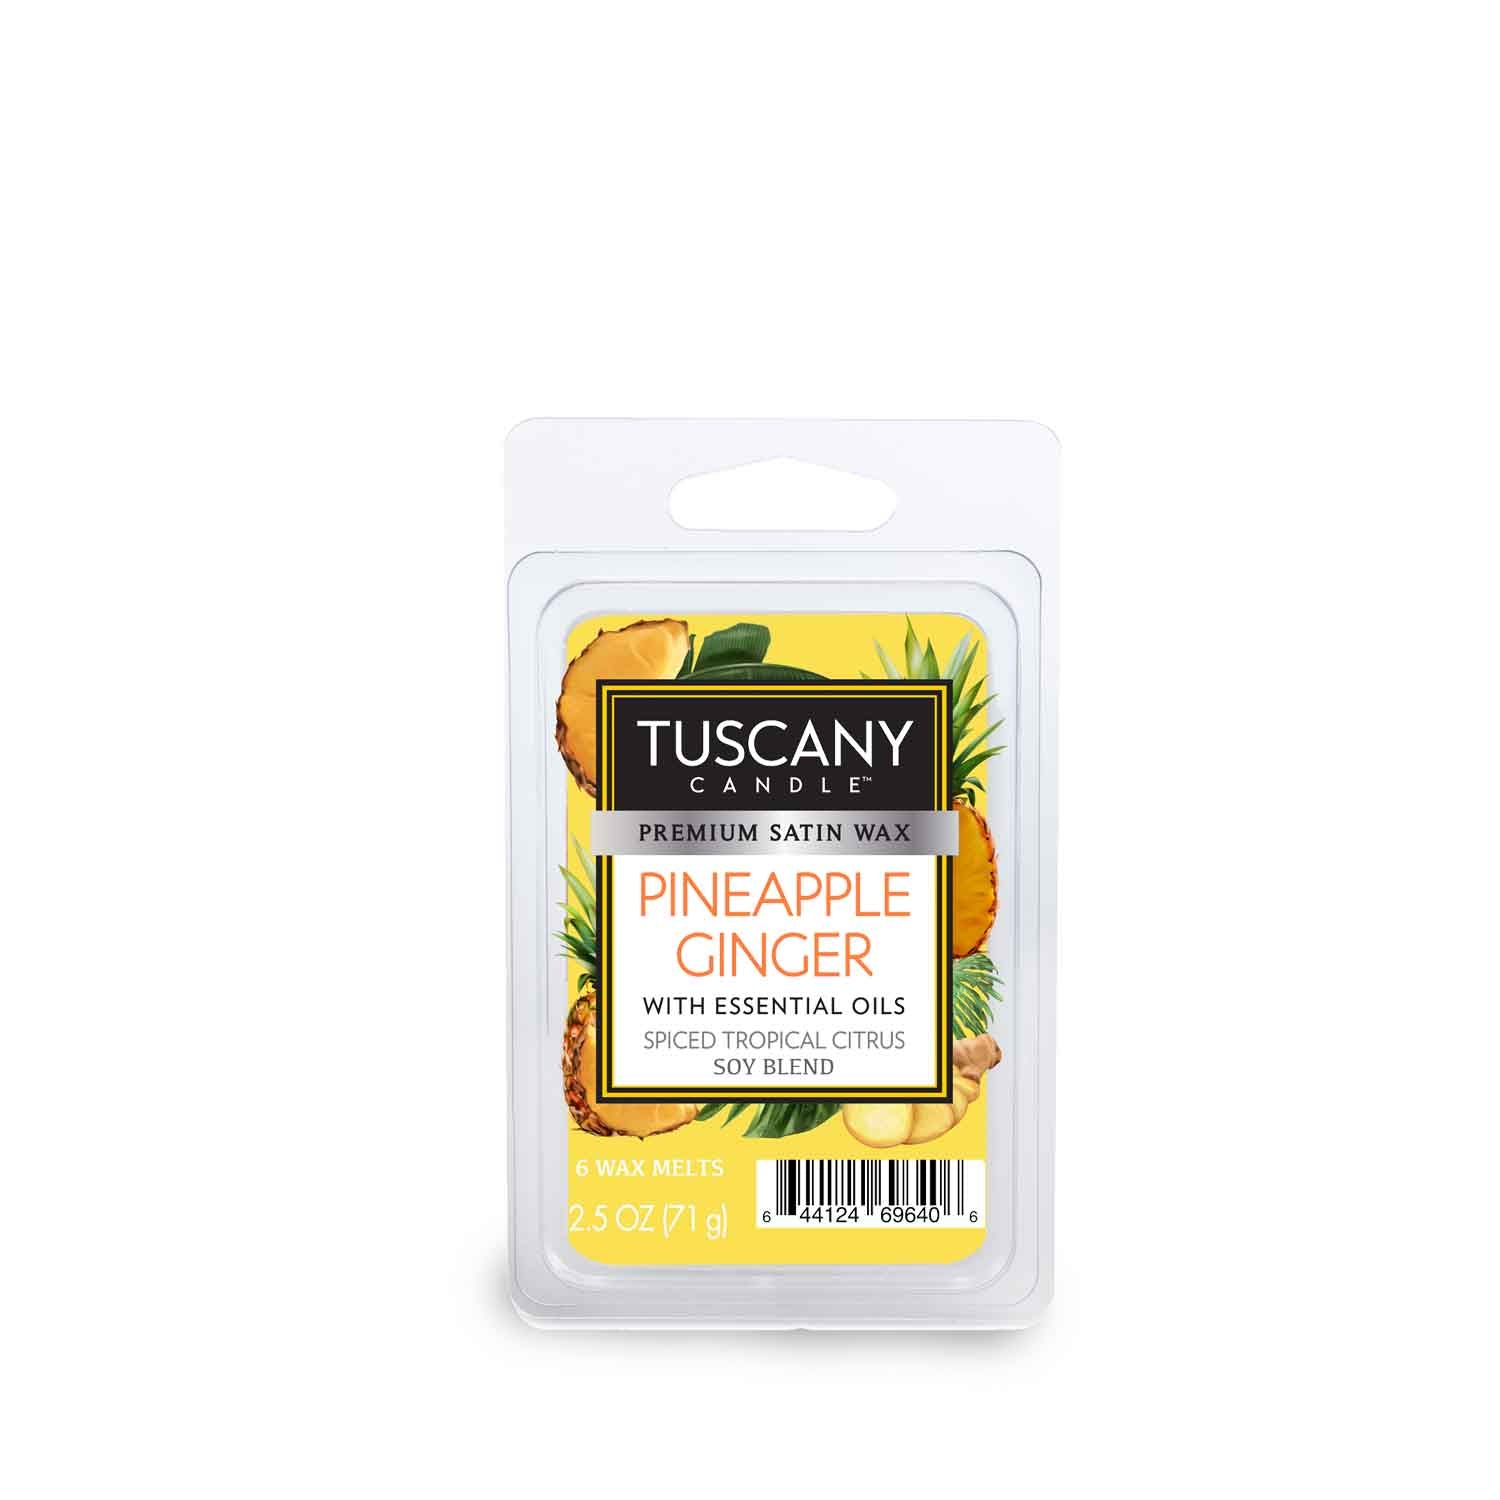 Tuscany Candle® presents the Pineapple Ginger Scented Wax Melt (2.5 oz) bar, infused with delightful fragrance notes that create a captivating aroma similar to a scented candle.